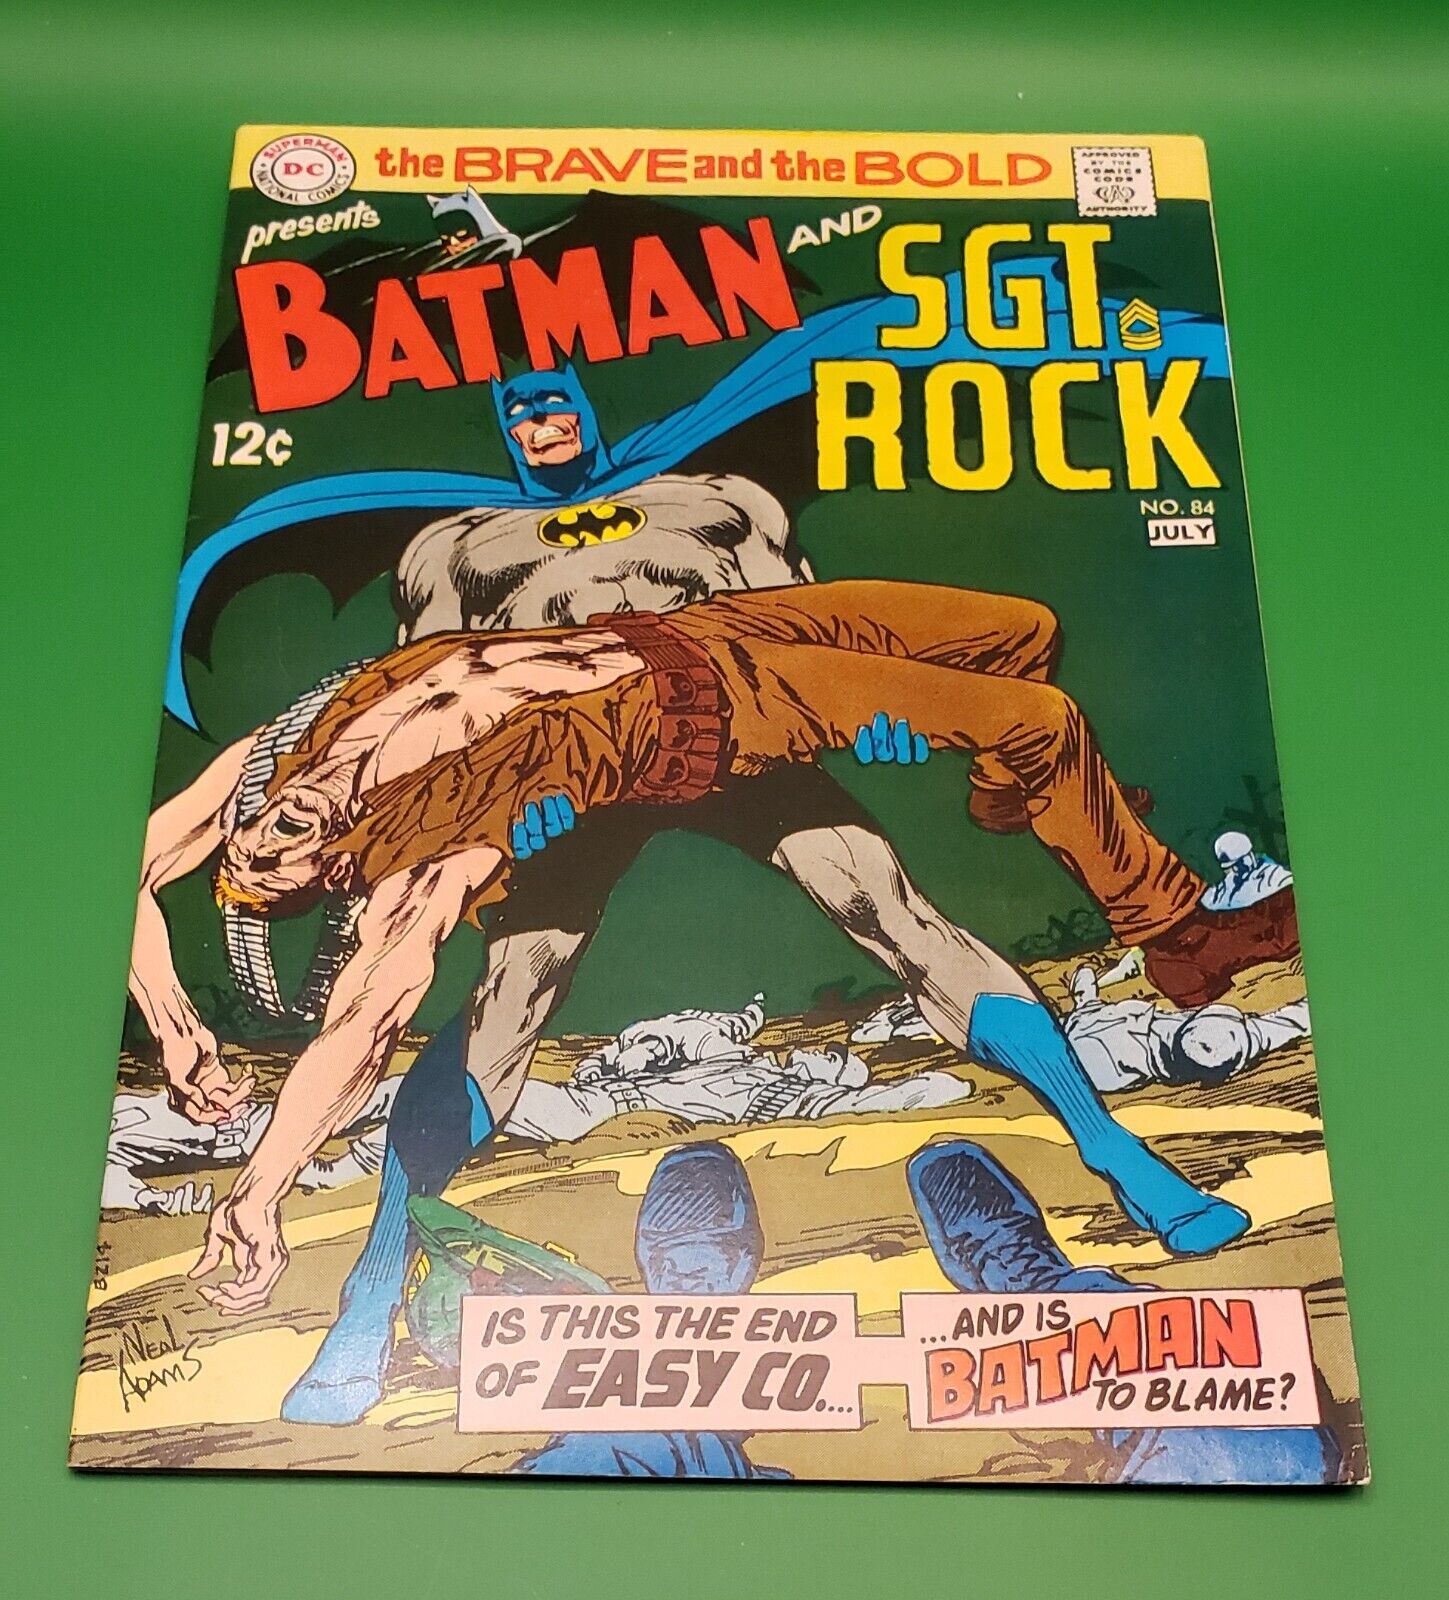 Brave and the Bold #84 Batman & Sgt. Rock - Neal Adams Cover 1969 VF